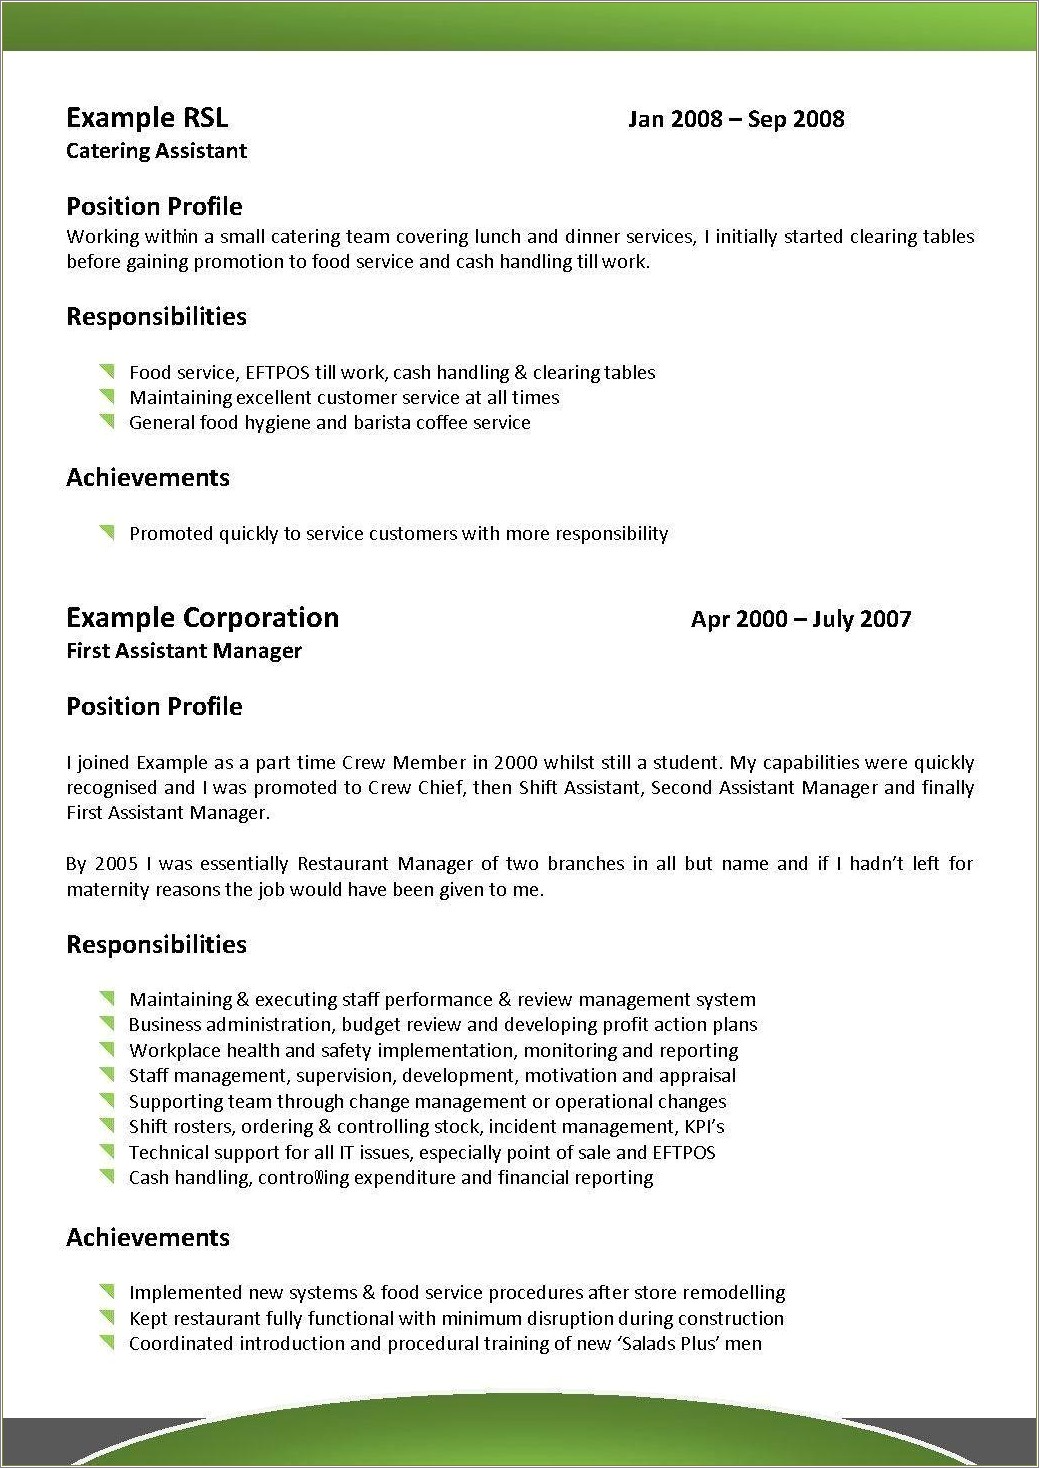 Acheivements For Foodservice Assistant Management Resume